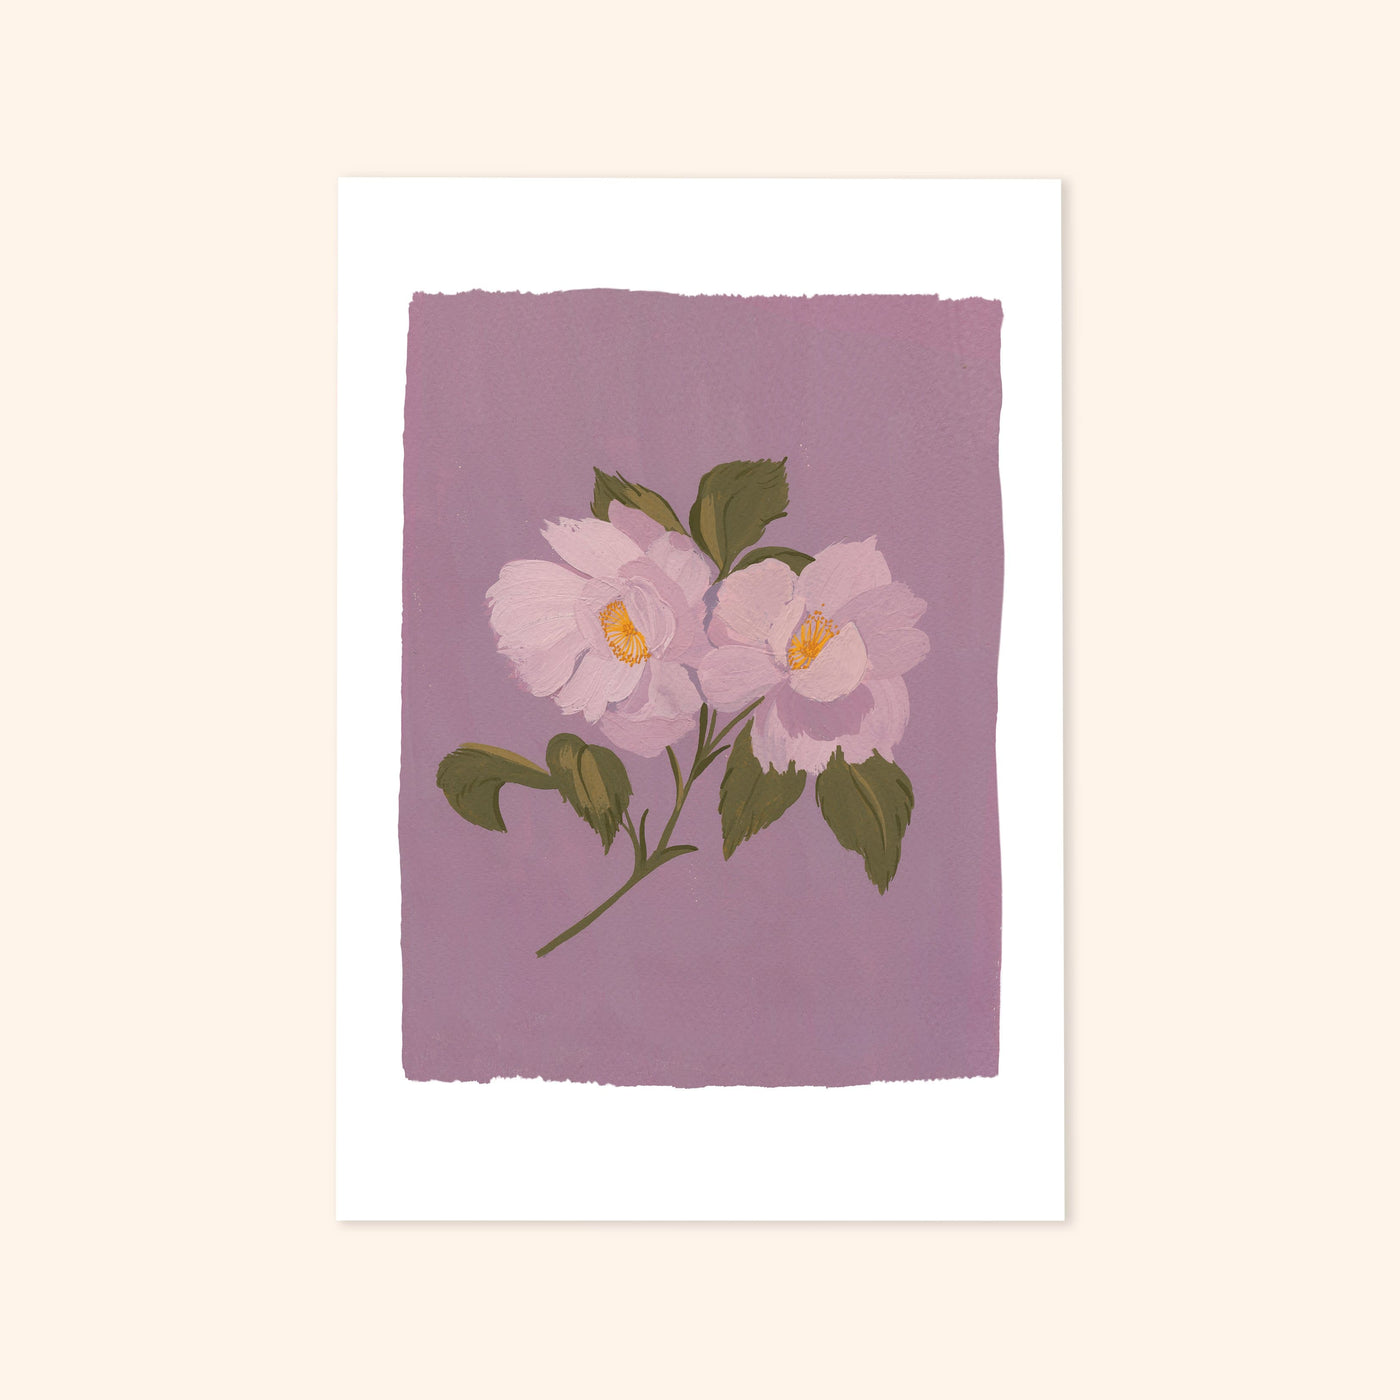 a print of a pair of illustrated light purple roses on a lilac background.